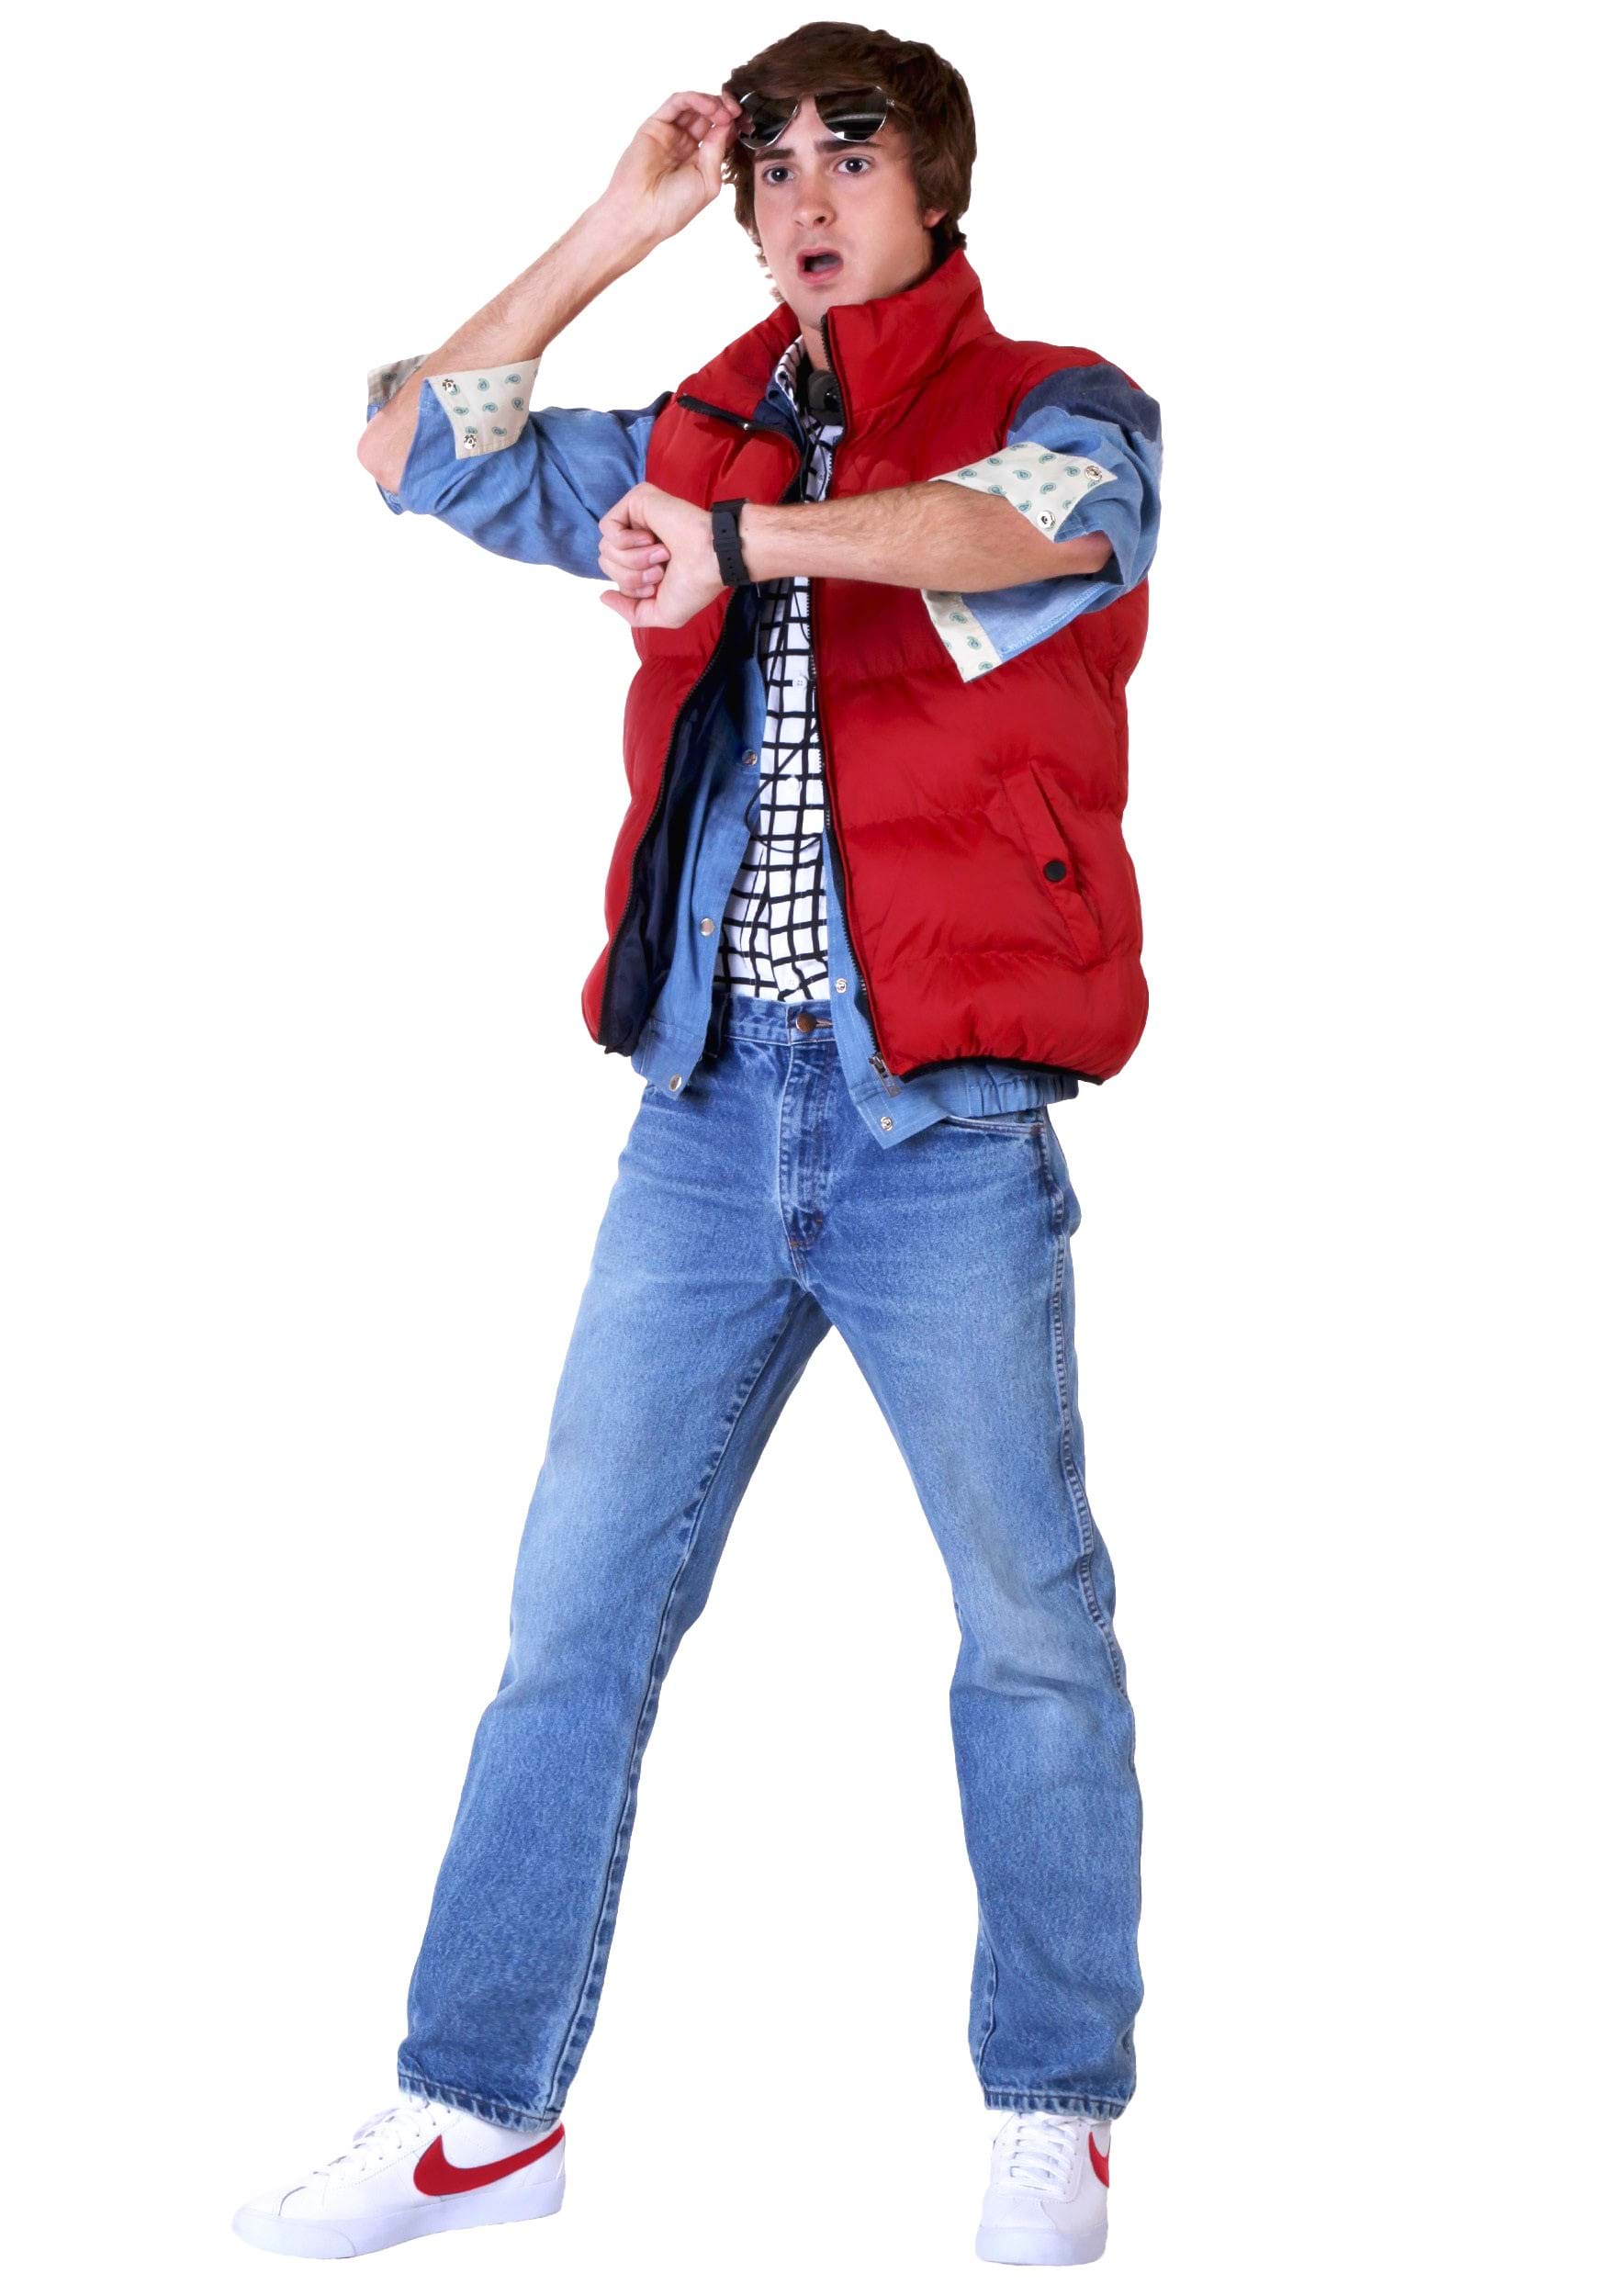 Back To The Future Marty McFly Fancy Dress Costume , 80s Movies Fancy Dress Costume